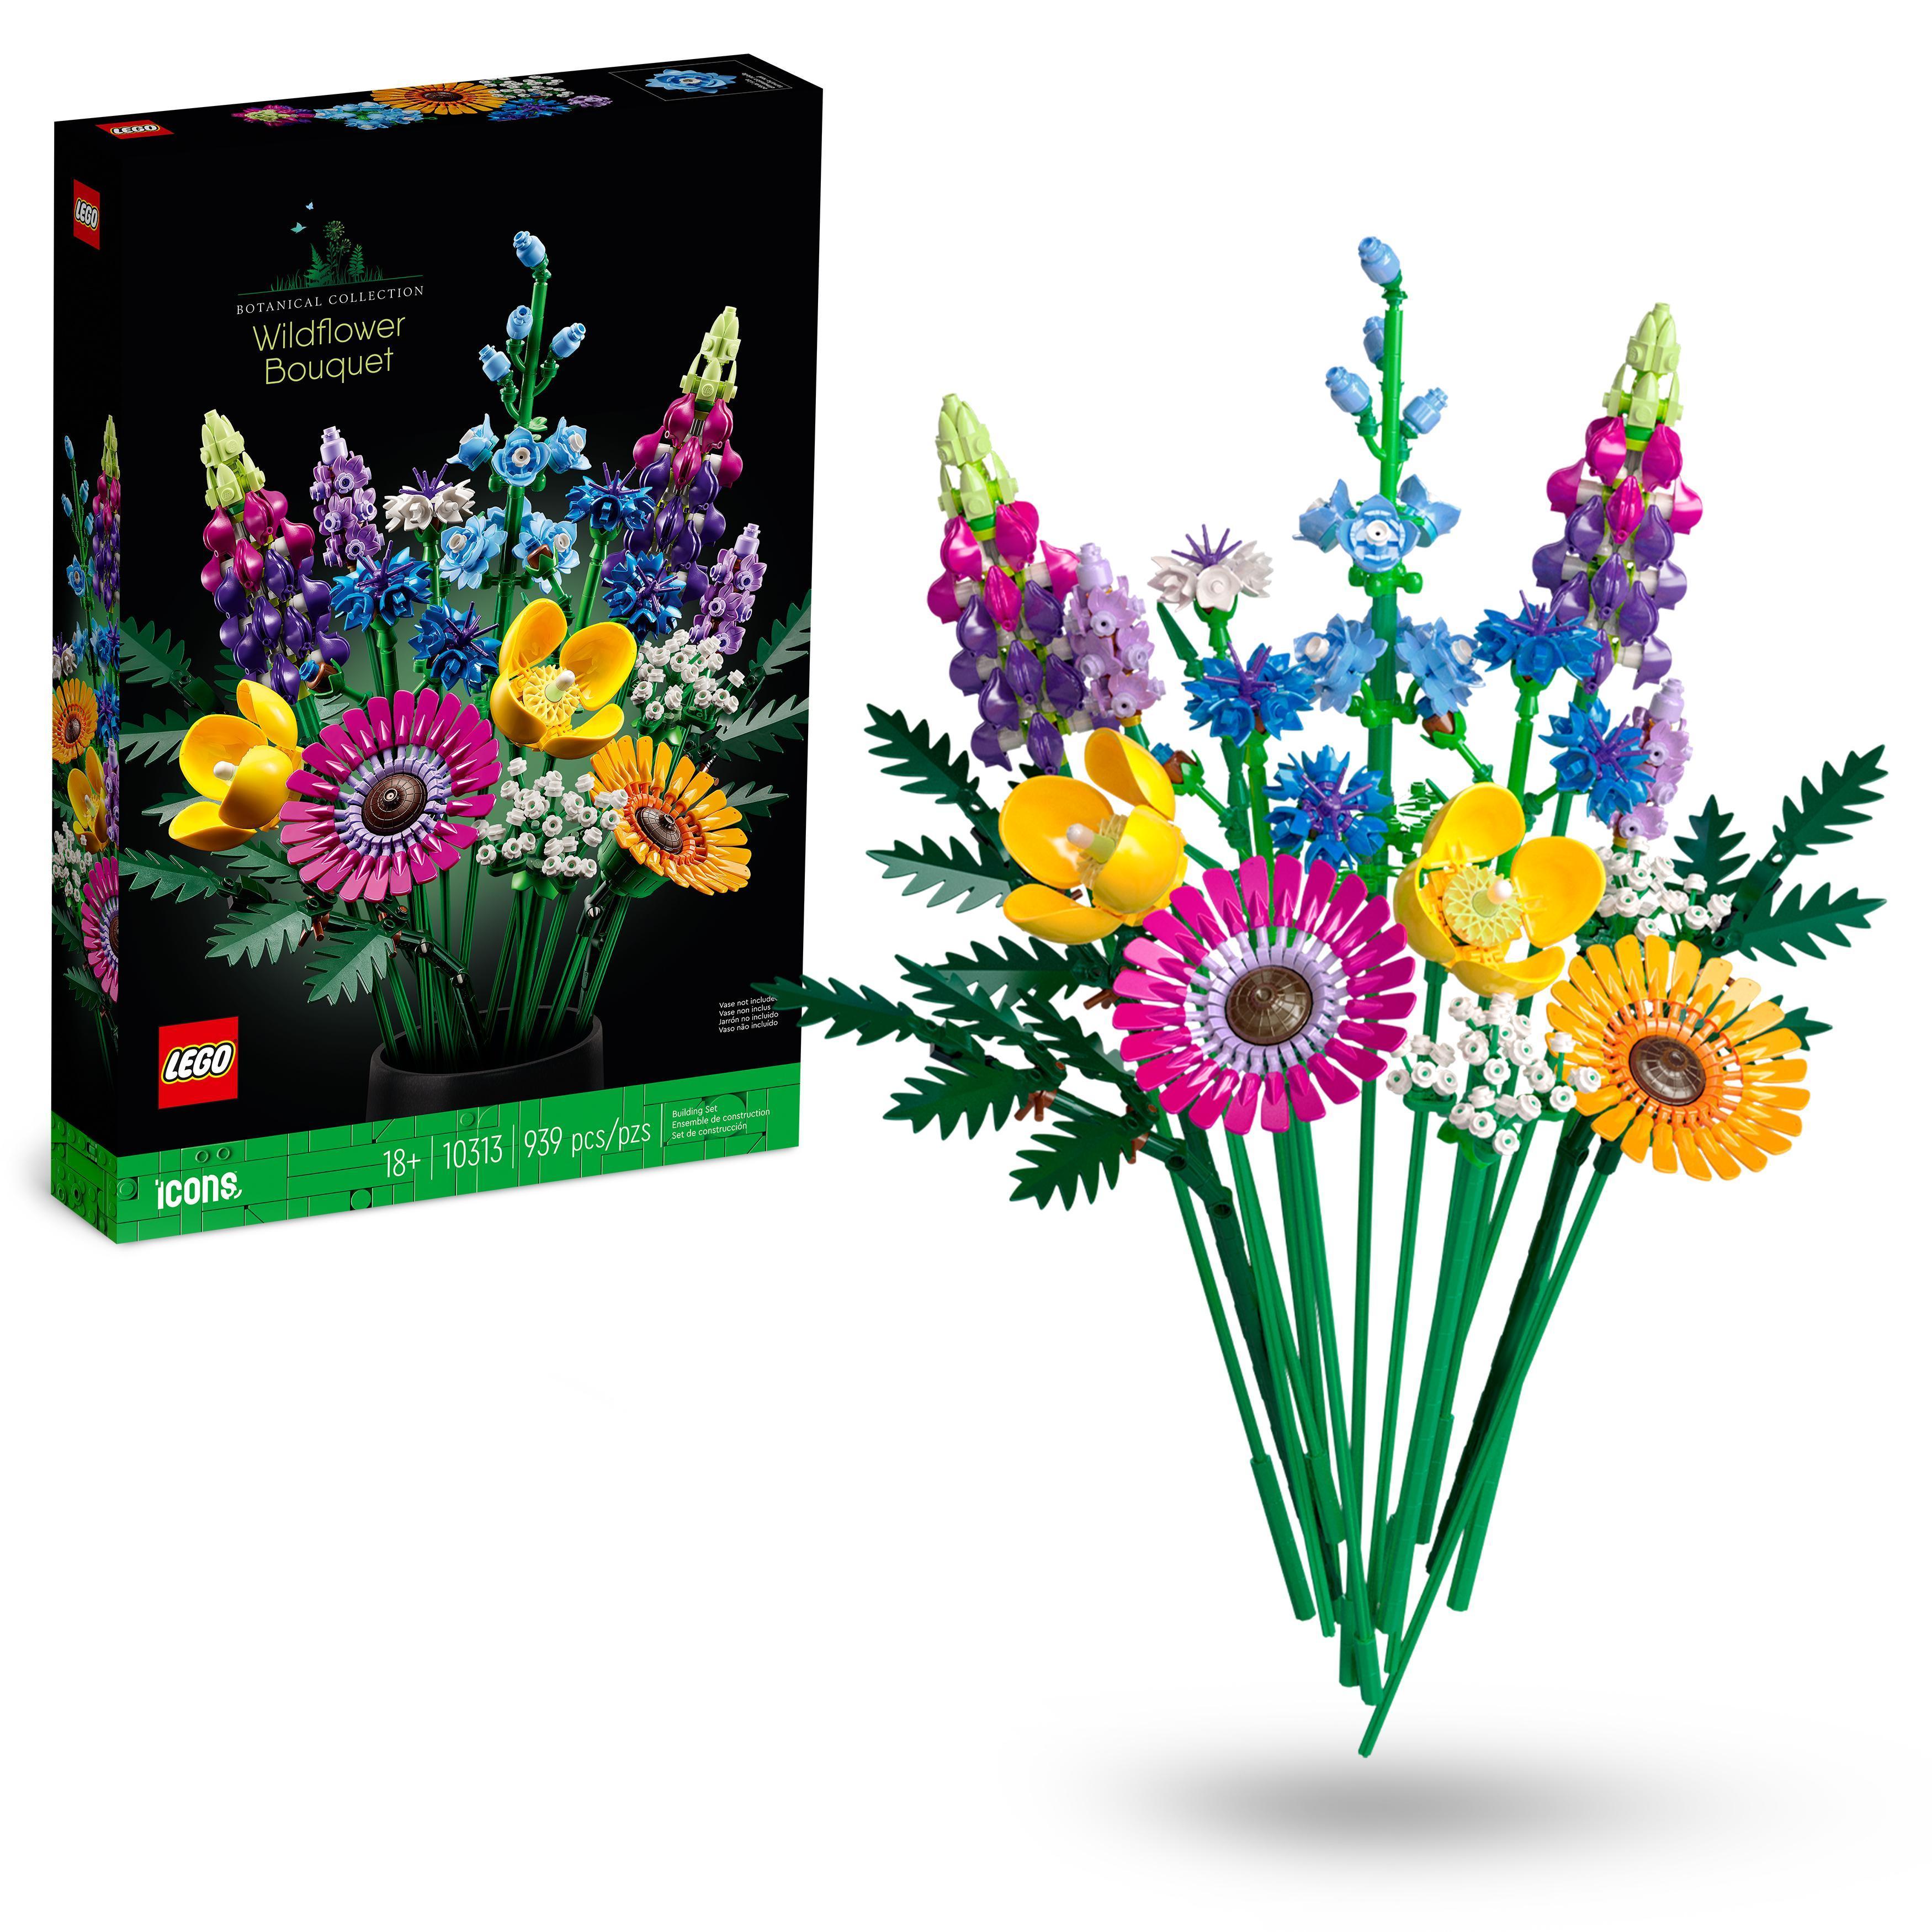 Buy LEGO Icons - Wild Flower Bouquet (10313) - Free shipping